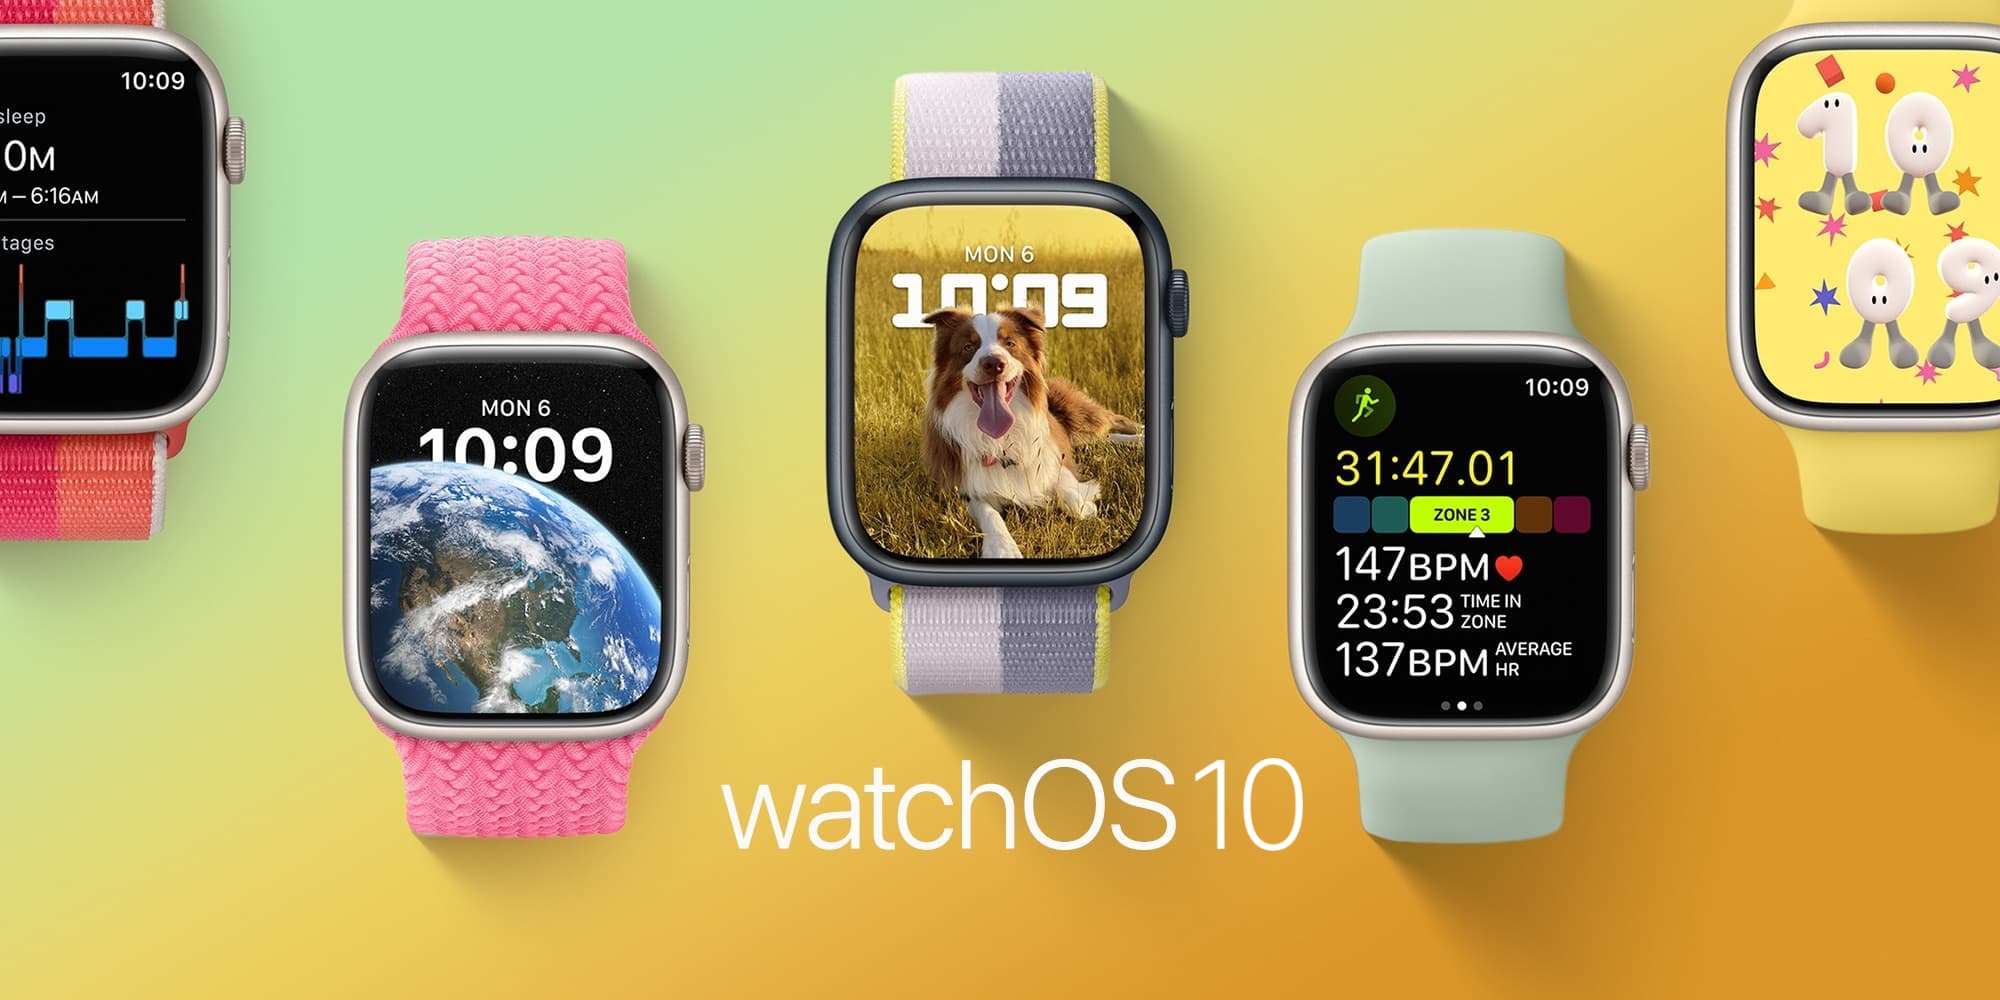 watchOS 10 will make changes to the interface